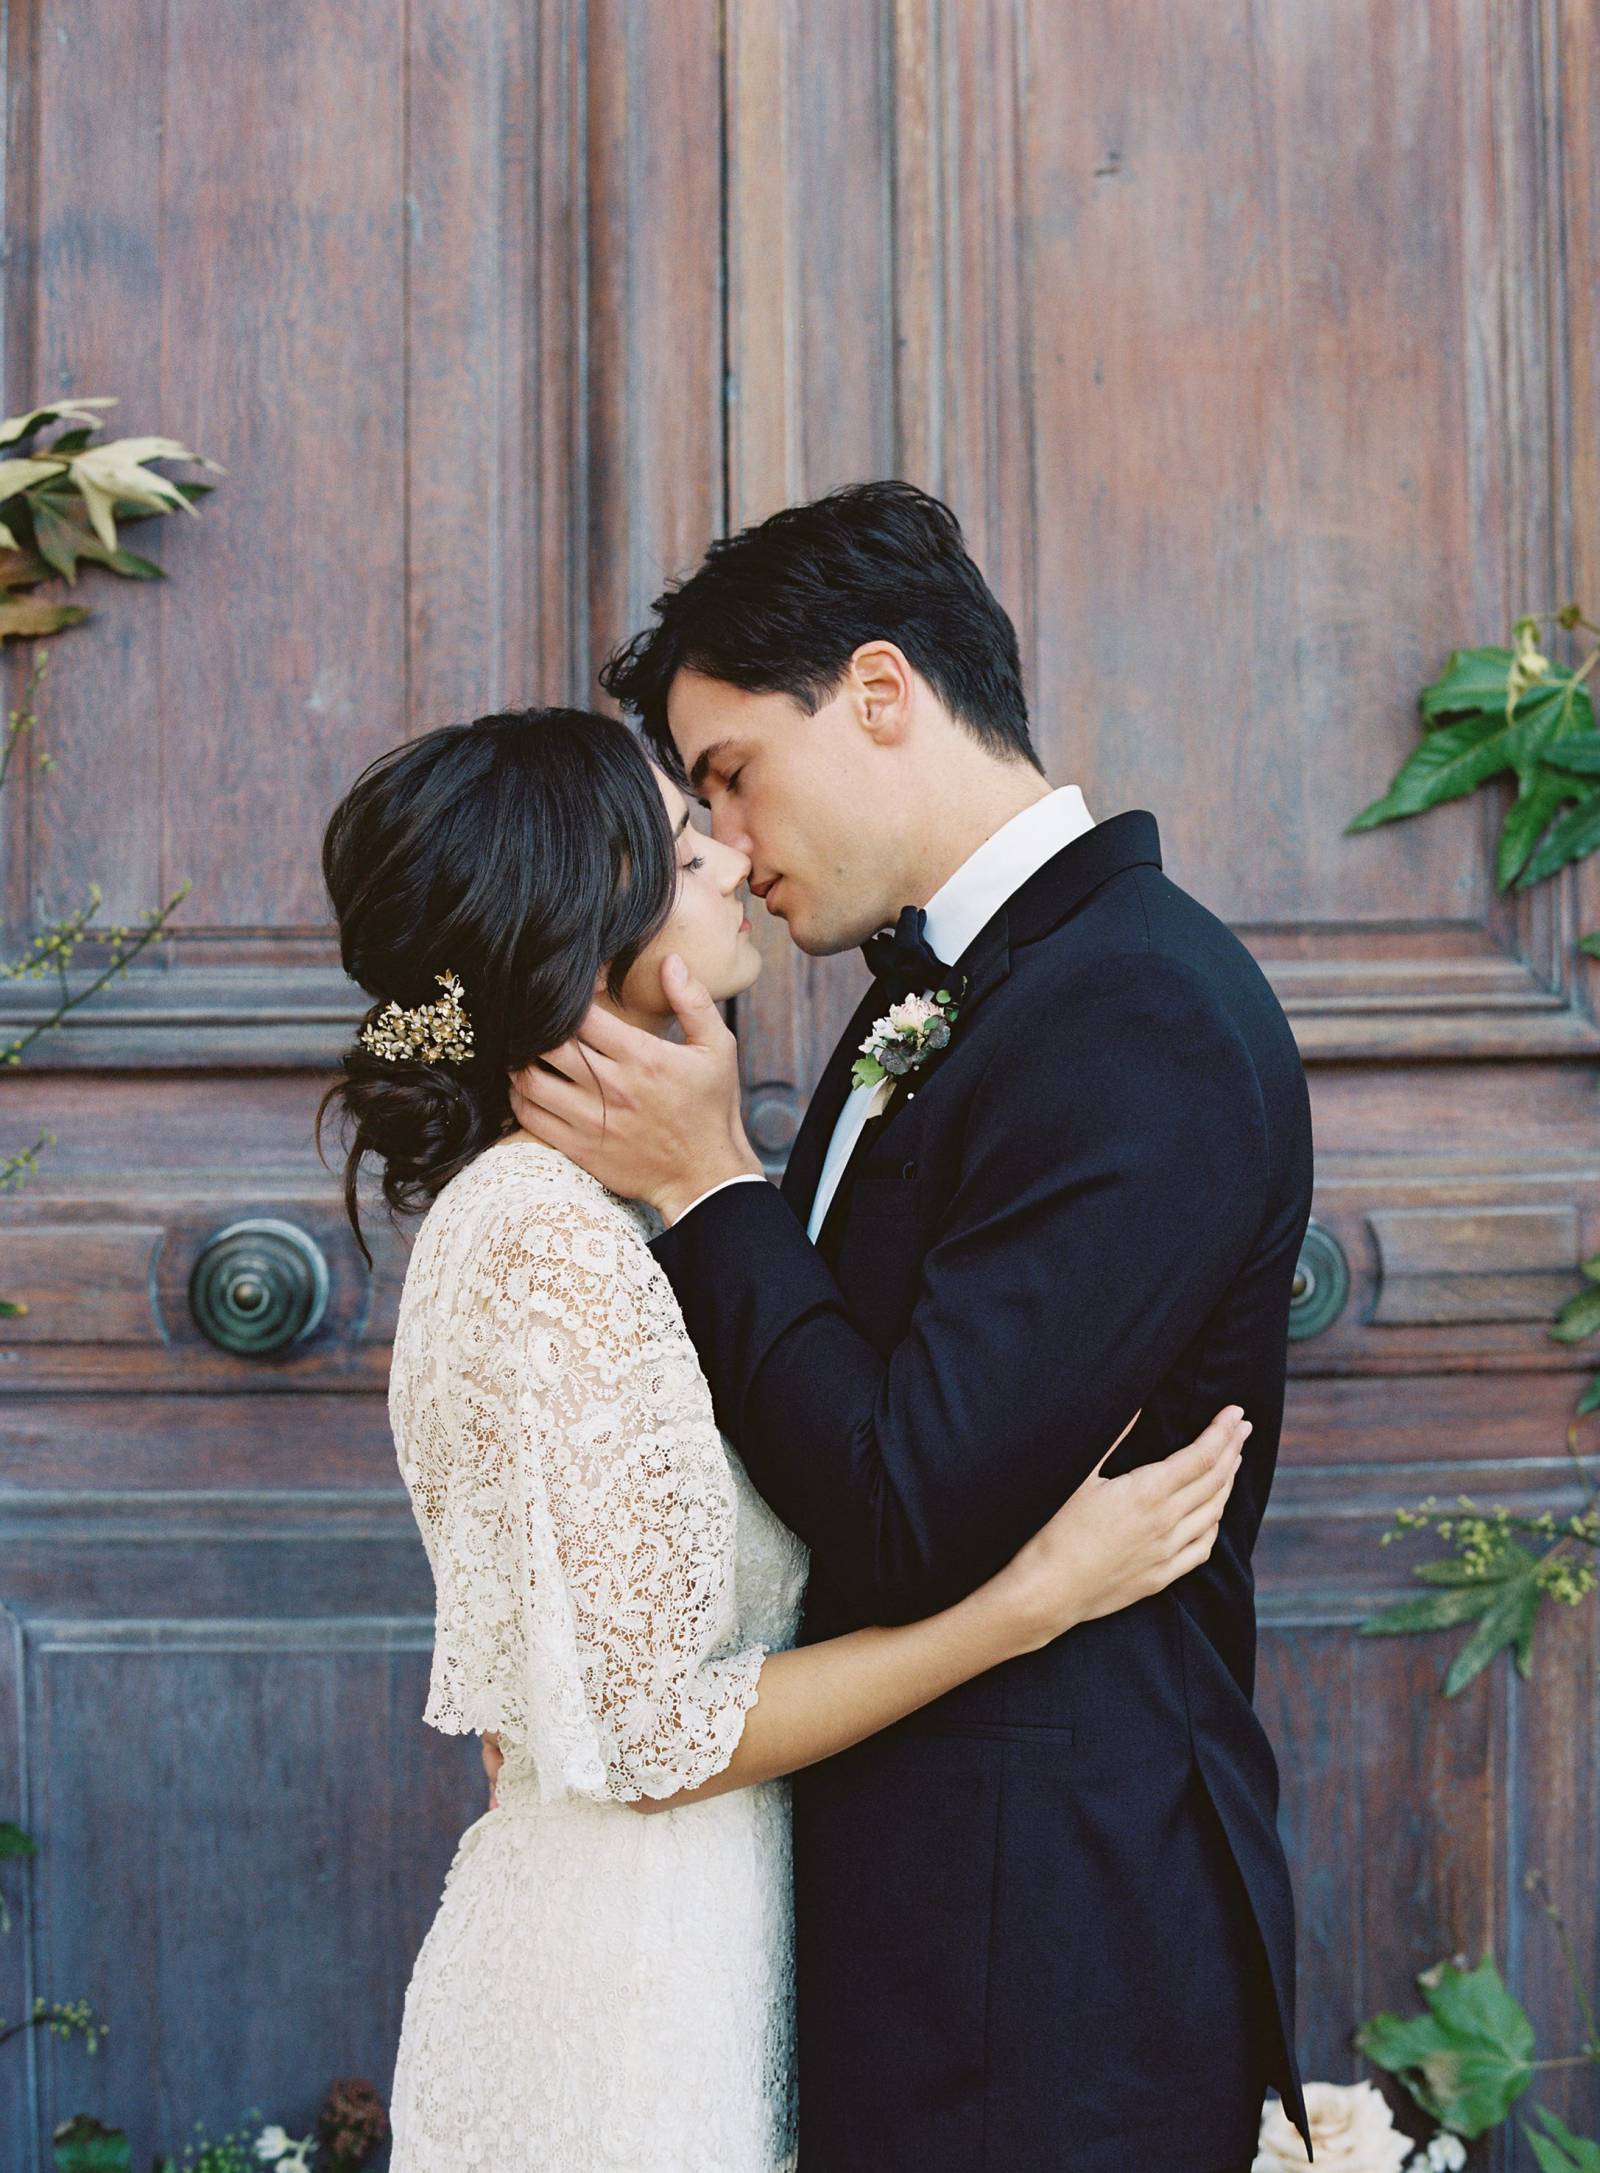 https://www.magnoliarouge.com/inspiration/old-world-elegance-wedding-inspiration-at-a-paso-robles-vineyard/